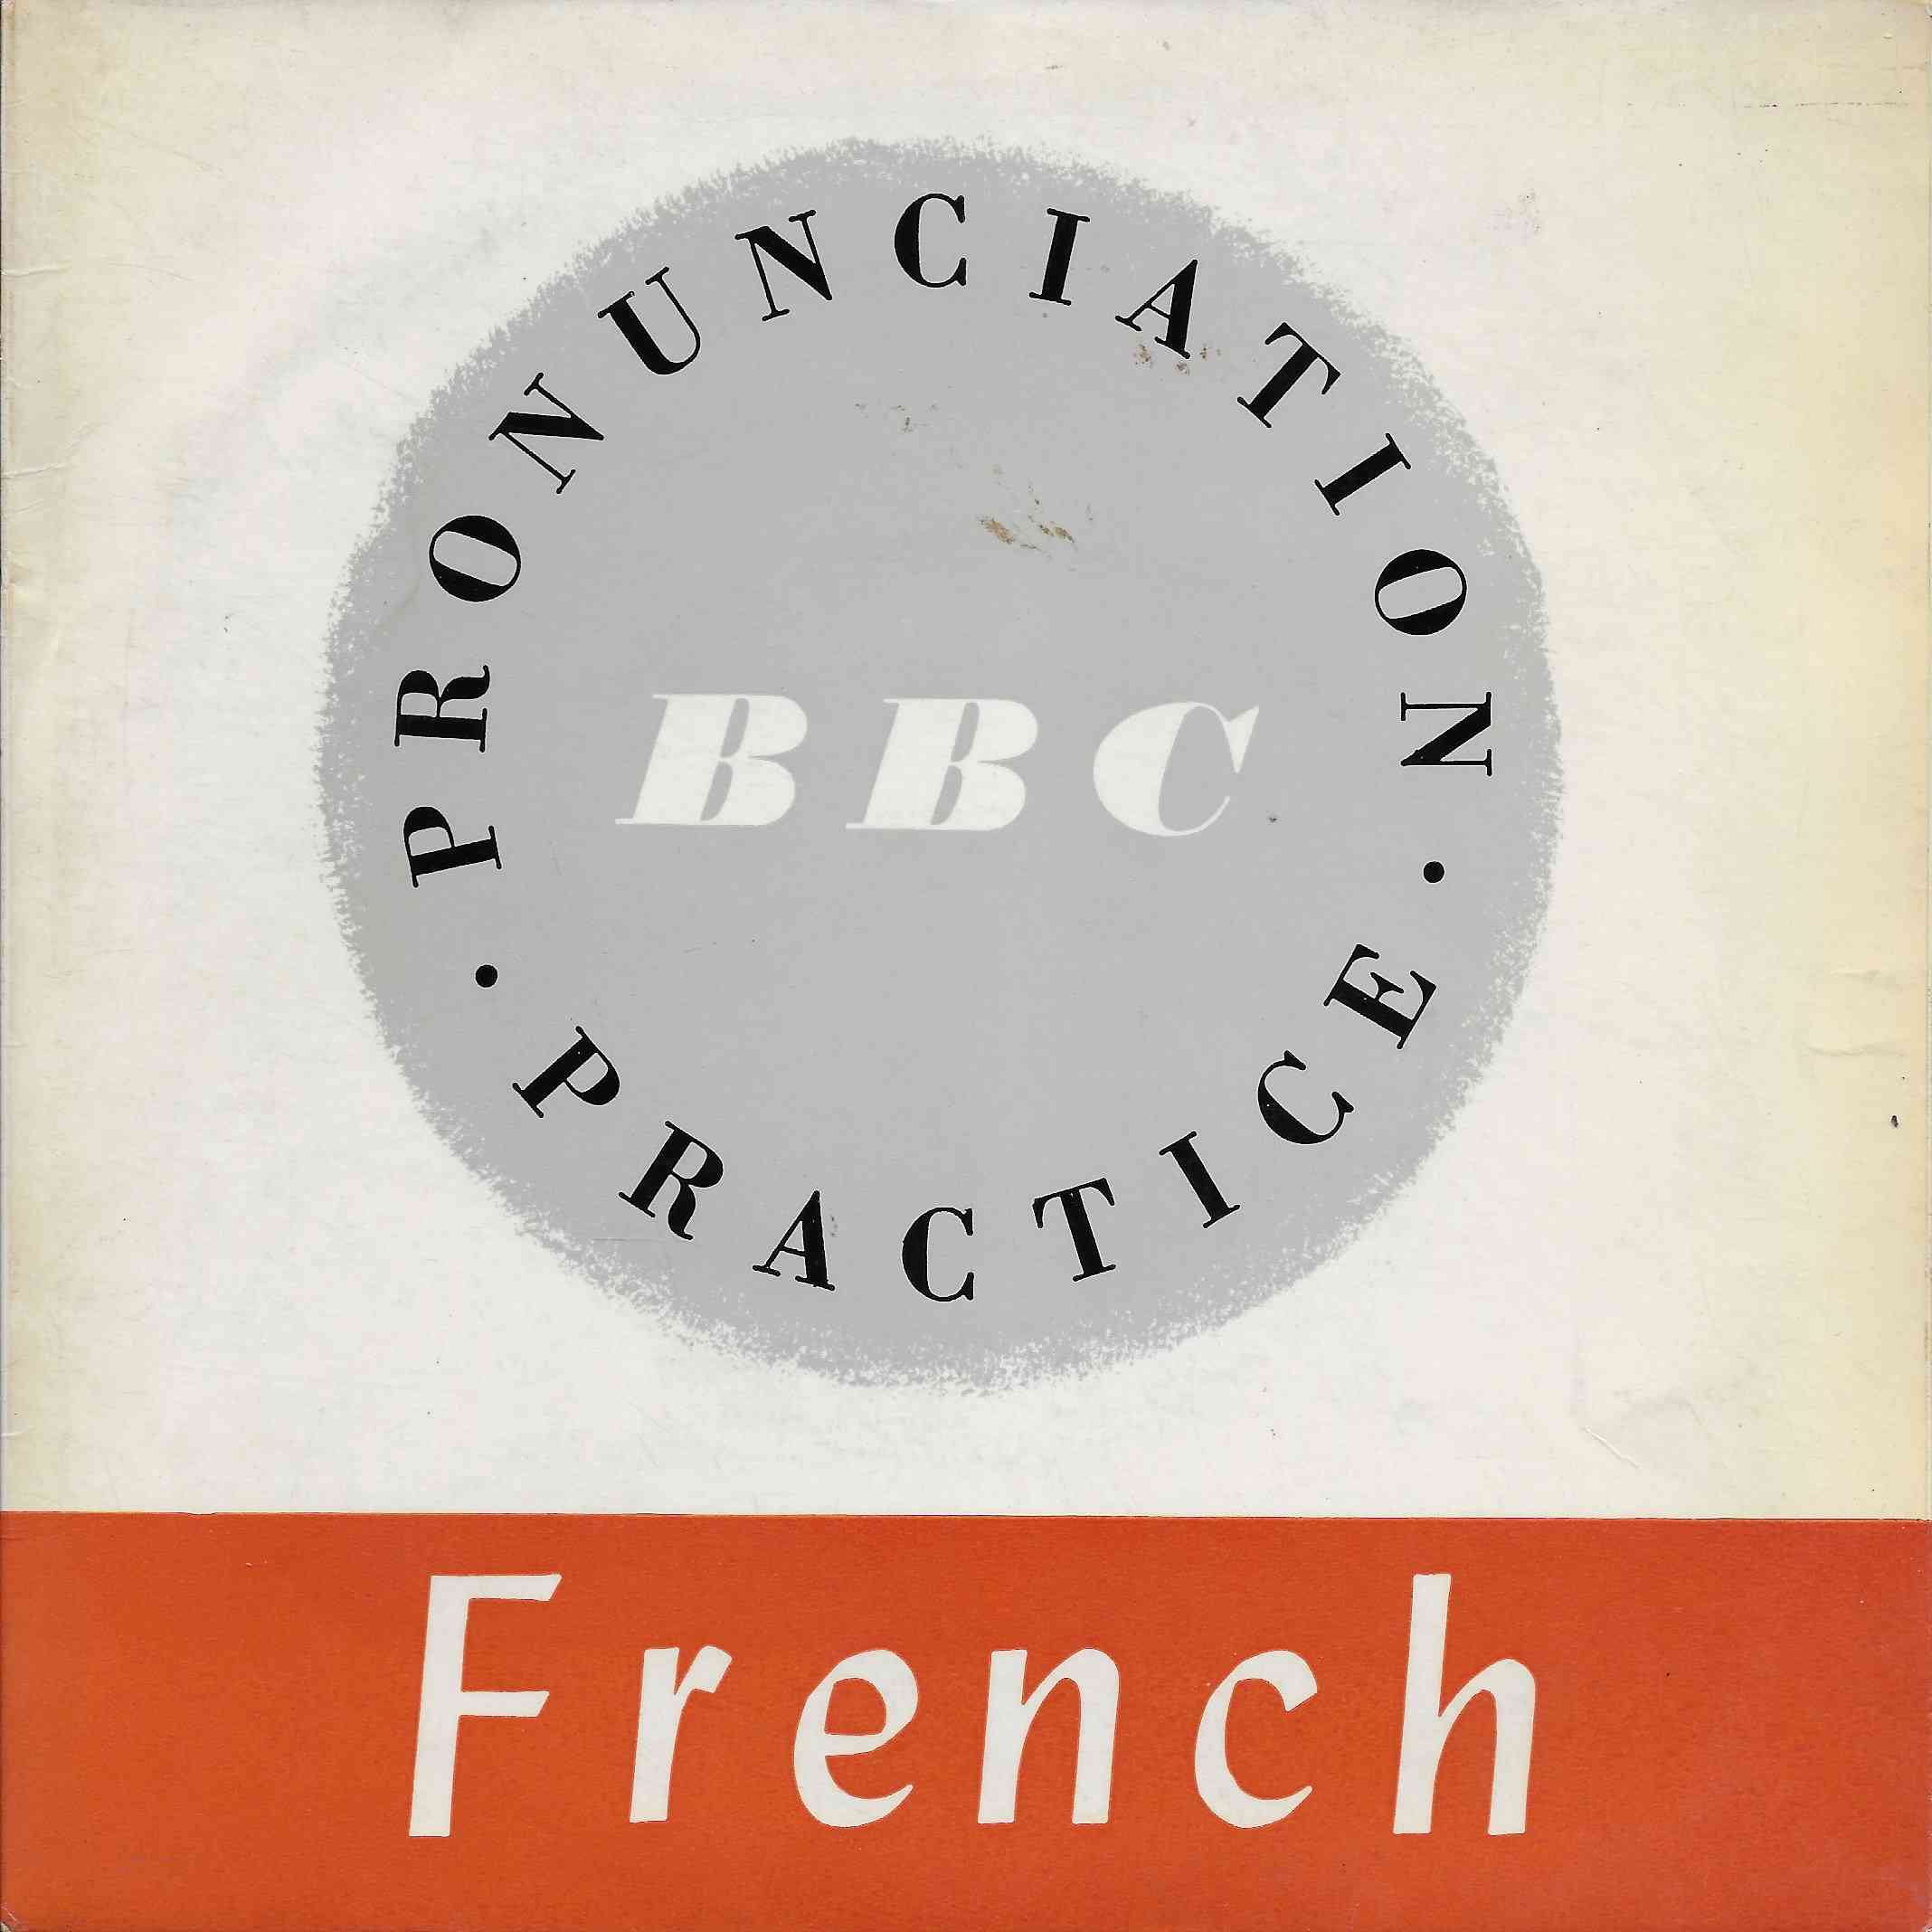 Picture of FRE-A-1 French by artist Elsie Ferguson from the BBC records and Tapes library